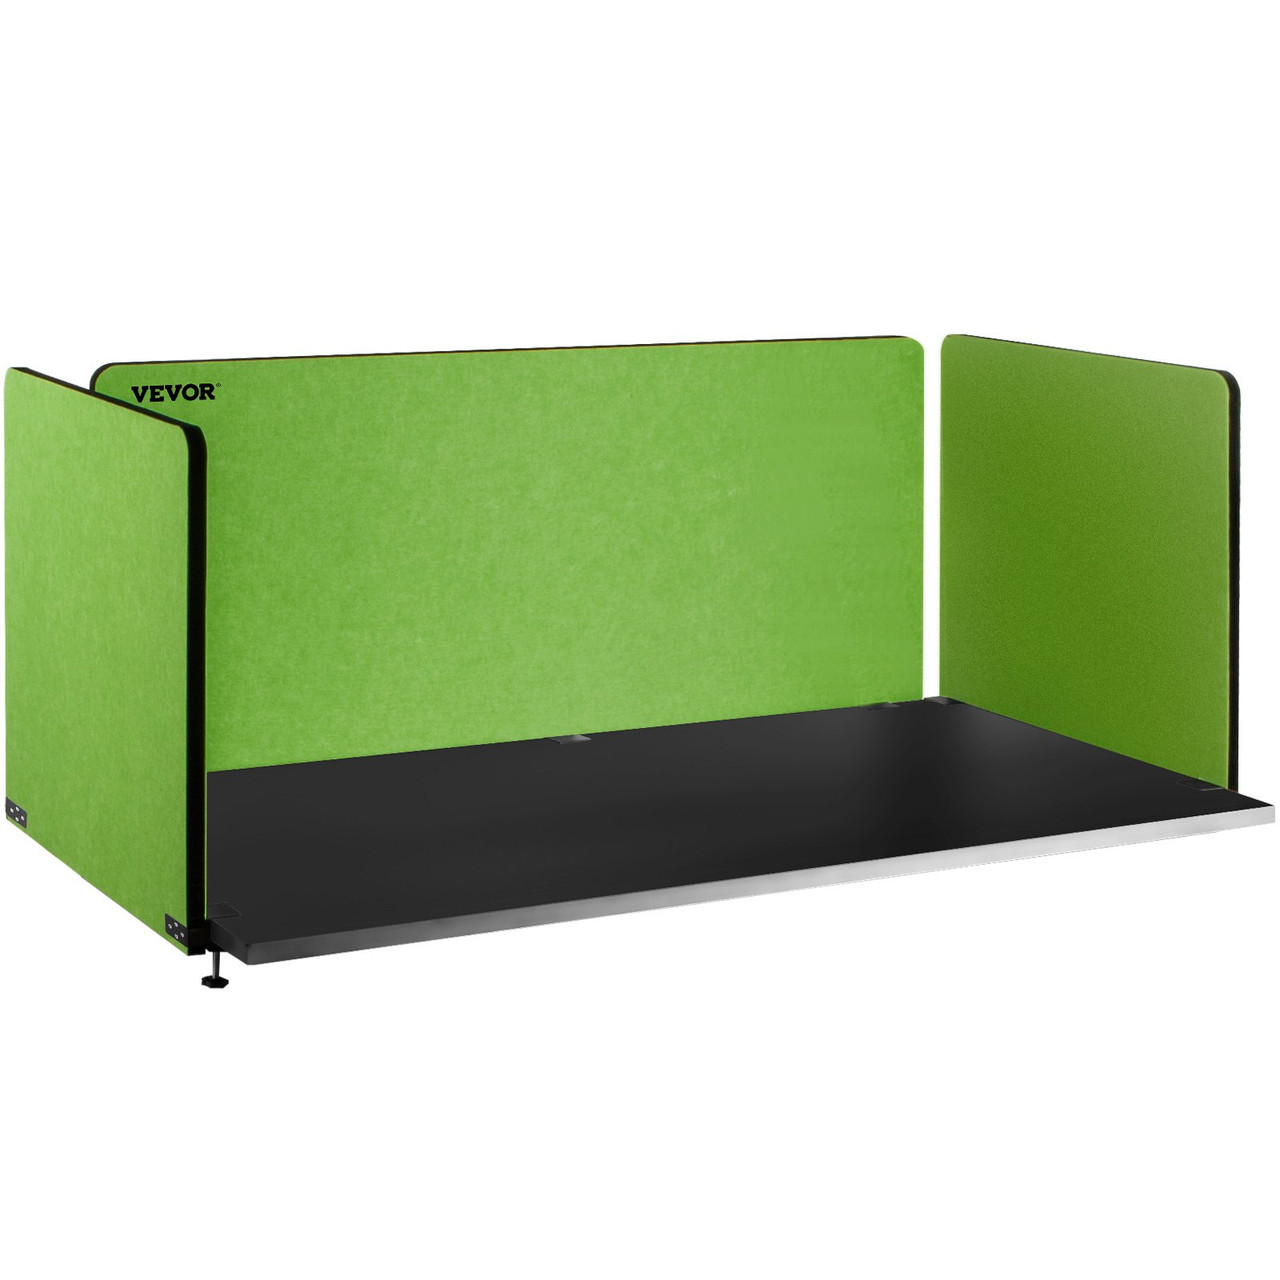 Desk Divider 60''X 24''(1) 24''X 24''(2) Desk Privacy Panel Flexible Mounted Desk Panels Reduce Noise and Visual Distractions for Office Classroom